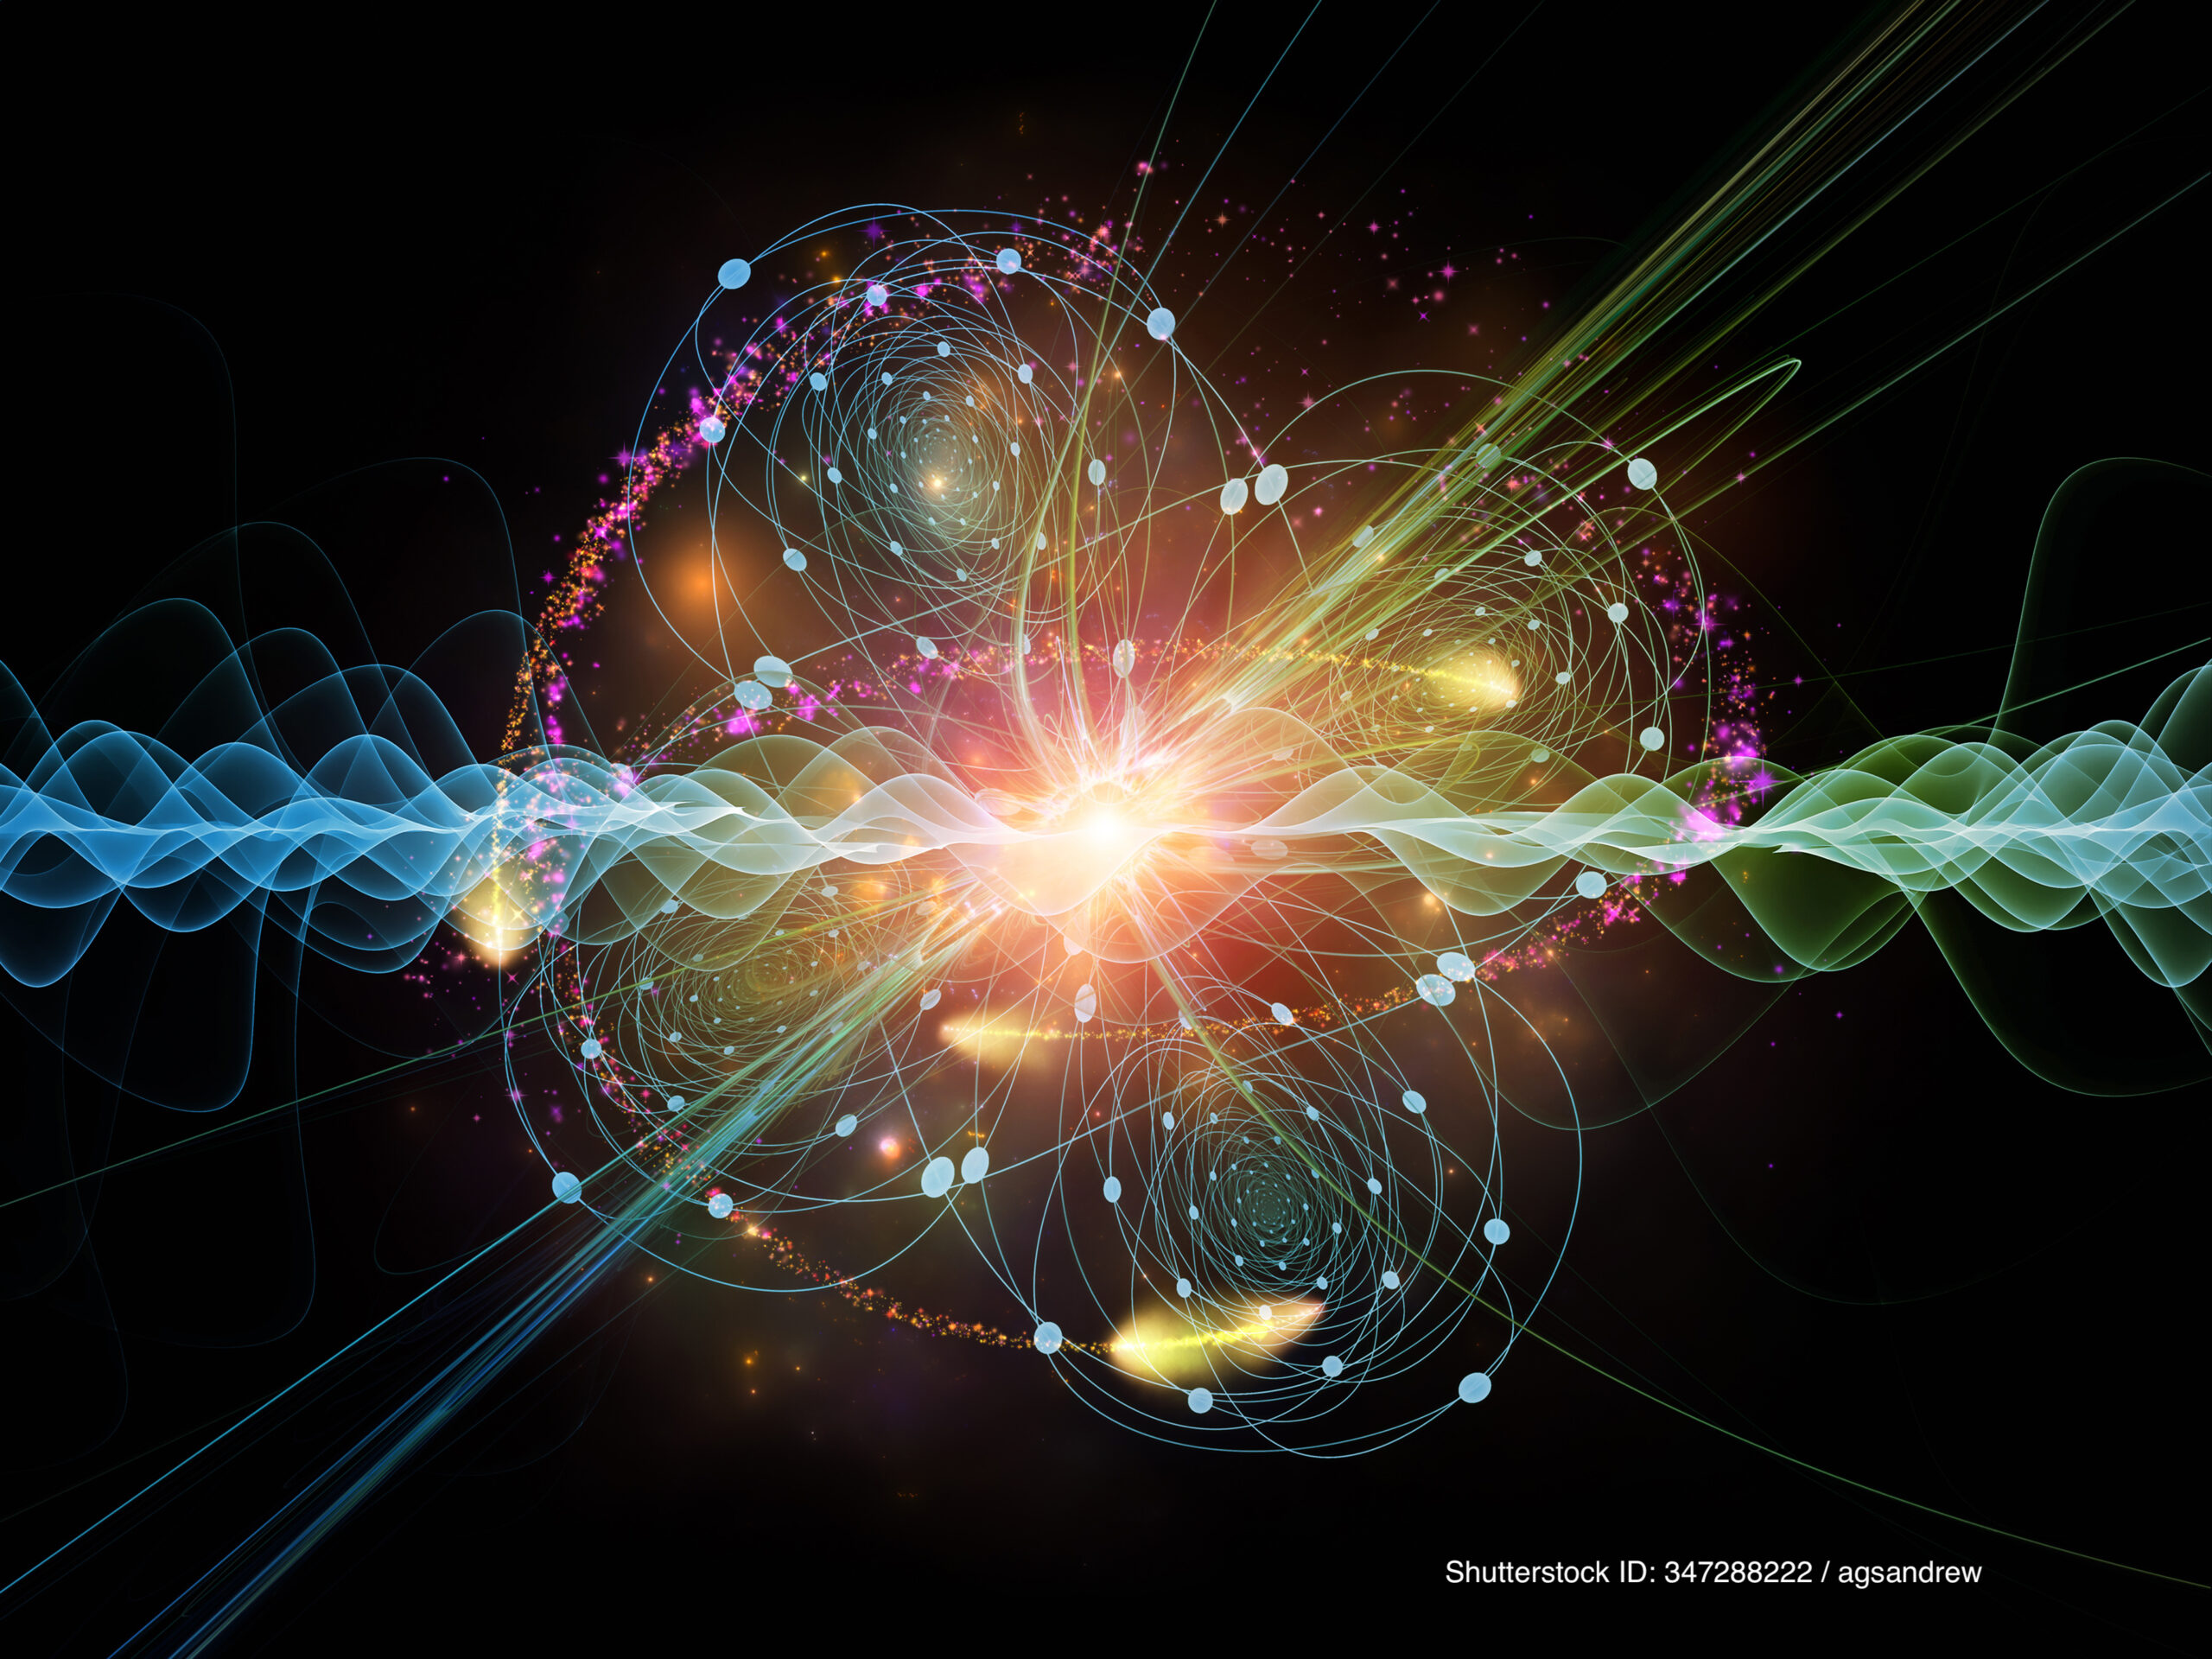 QUANTUM MECHANICS AND BEYOND – Monday 21st of March – Conference by Angelo Bassi